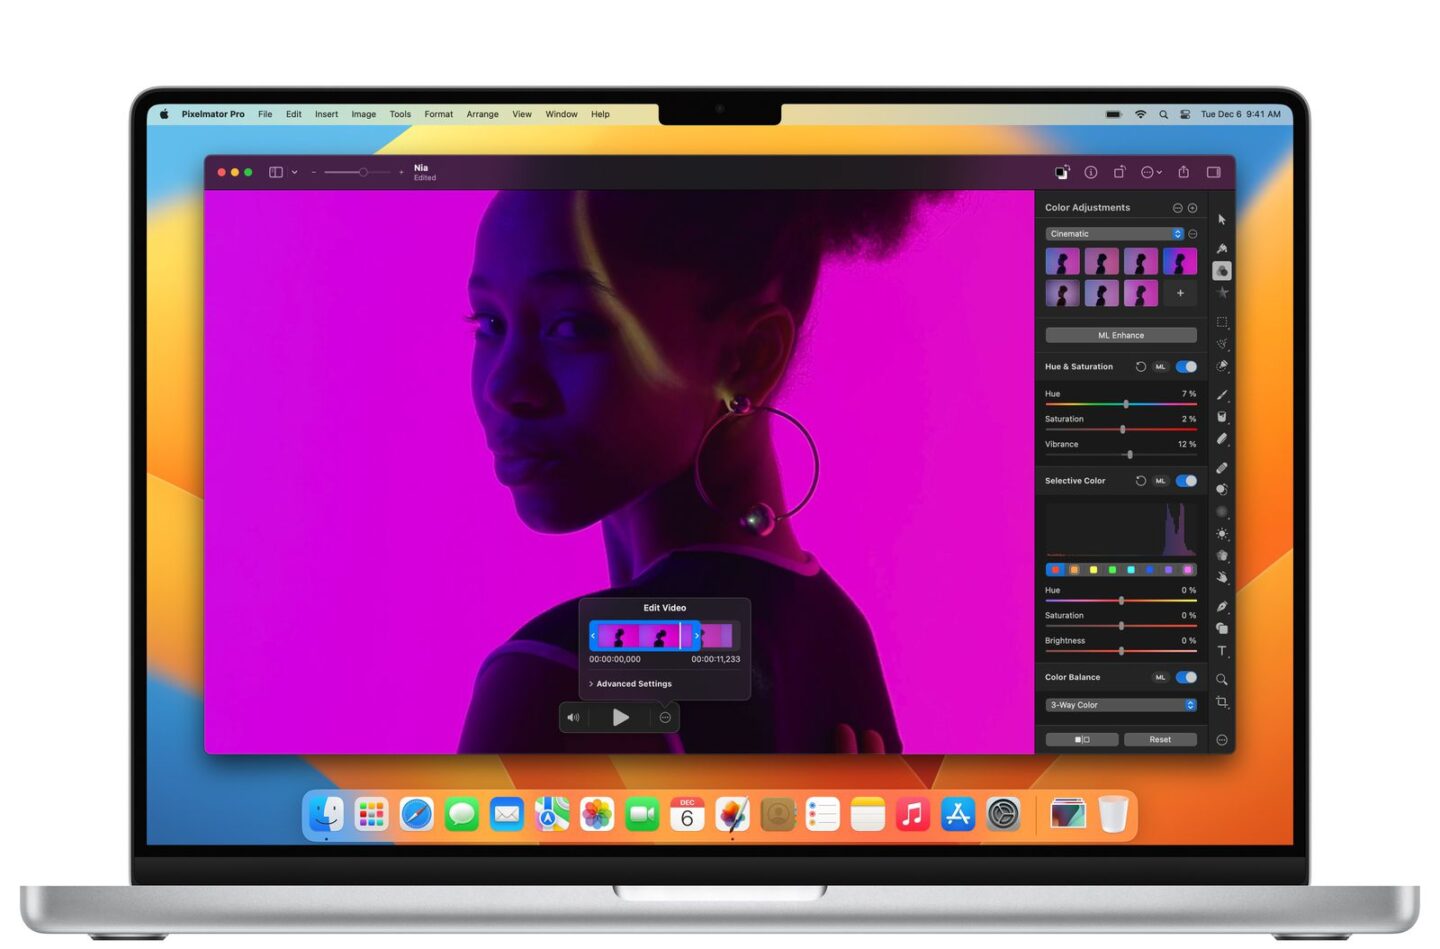 Pixelmator Pro 3.2 has received the functions of a video editor